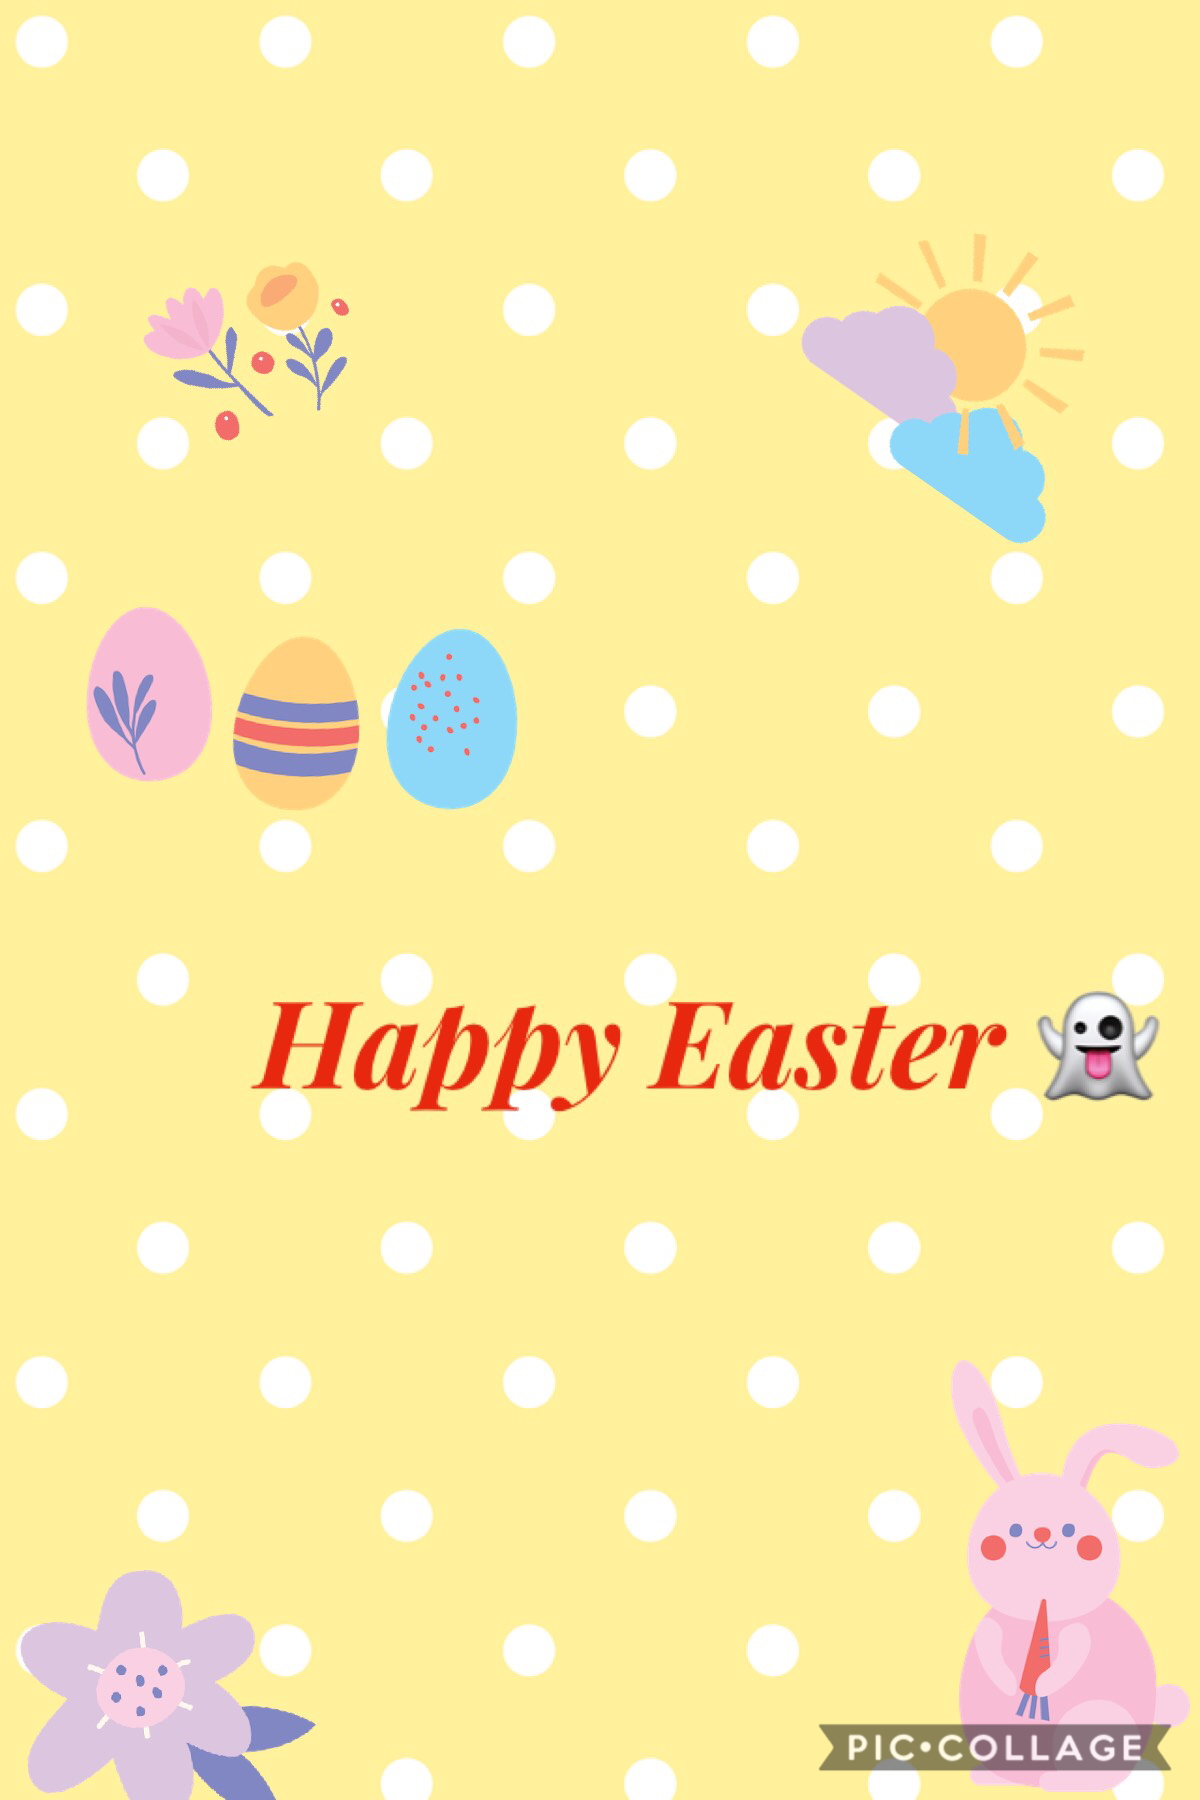 Happy Easter users 